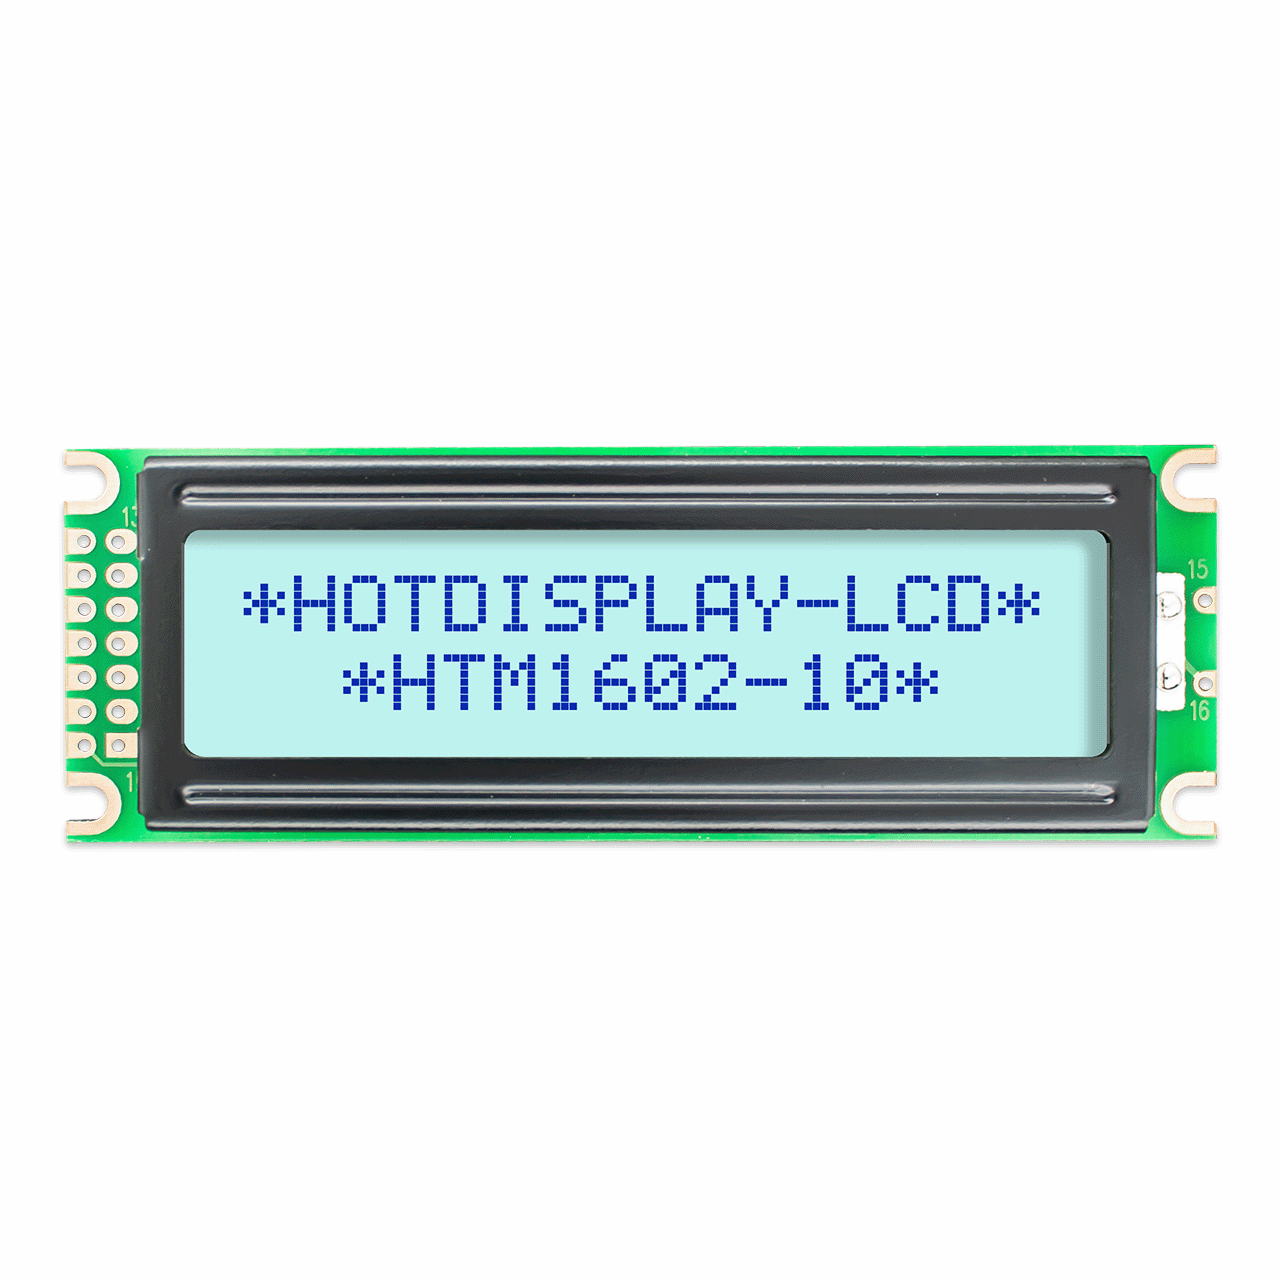 16X2 Character MONO LCD | STN+ Gray Display with Side White Backlight 5.0V-Arduino